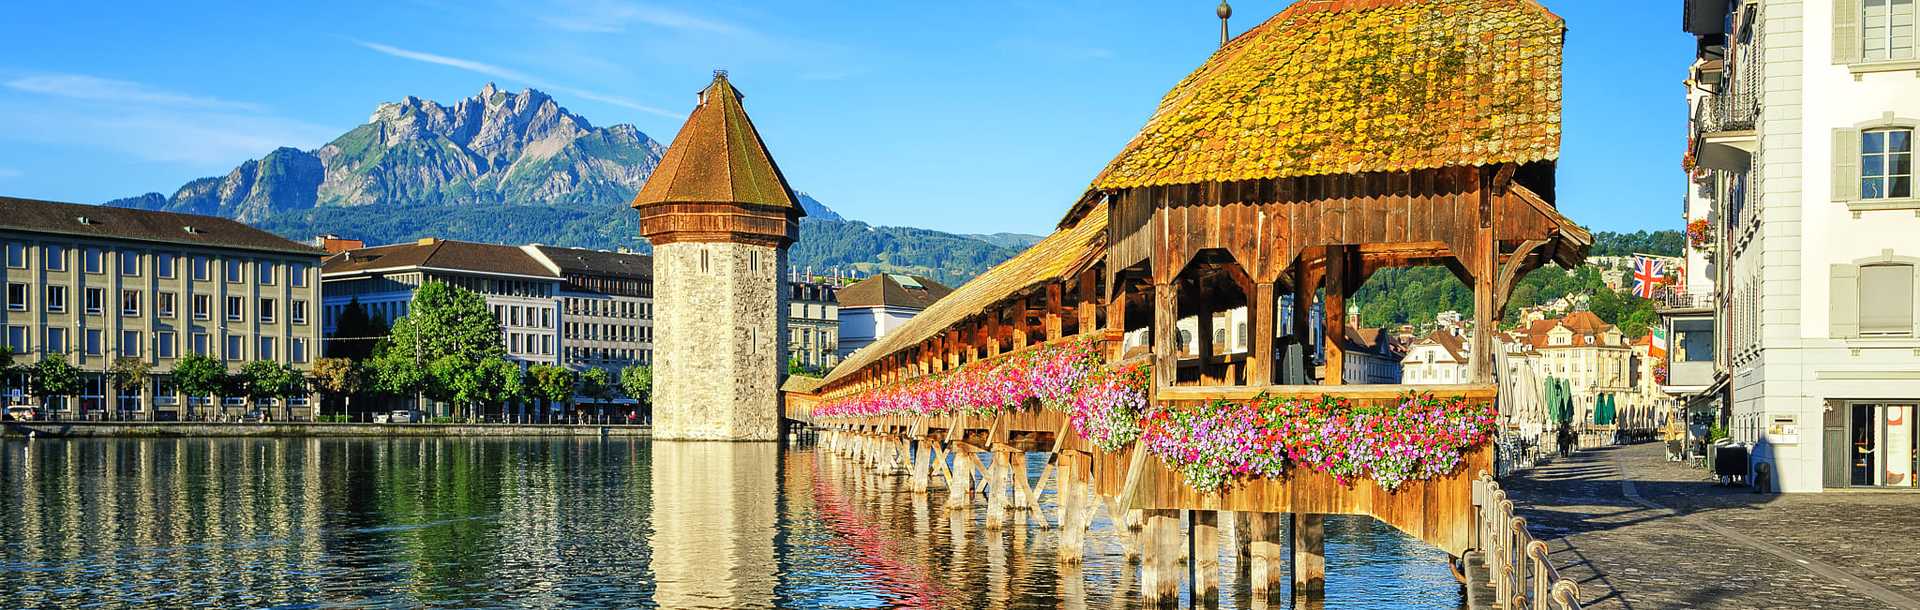 Deck covered in flowers on a lake in Lucerne, Switzerland.